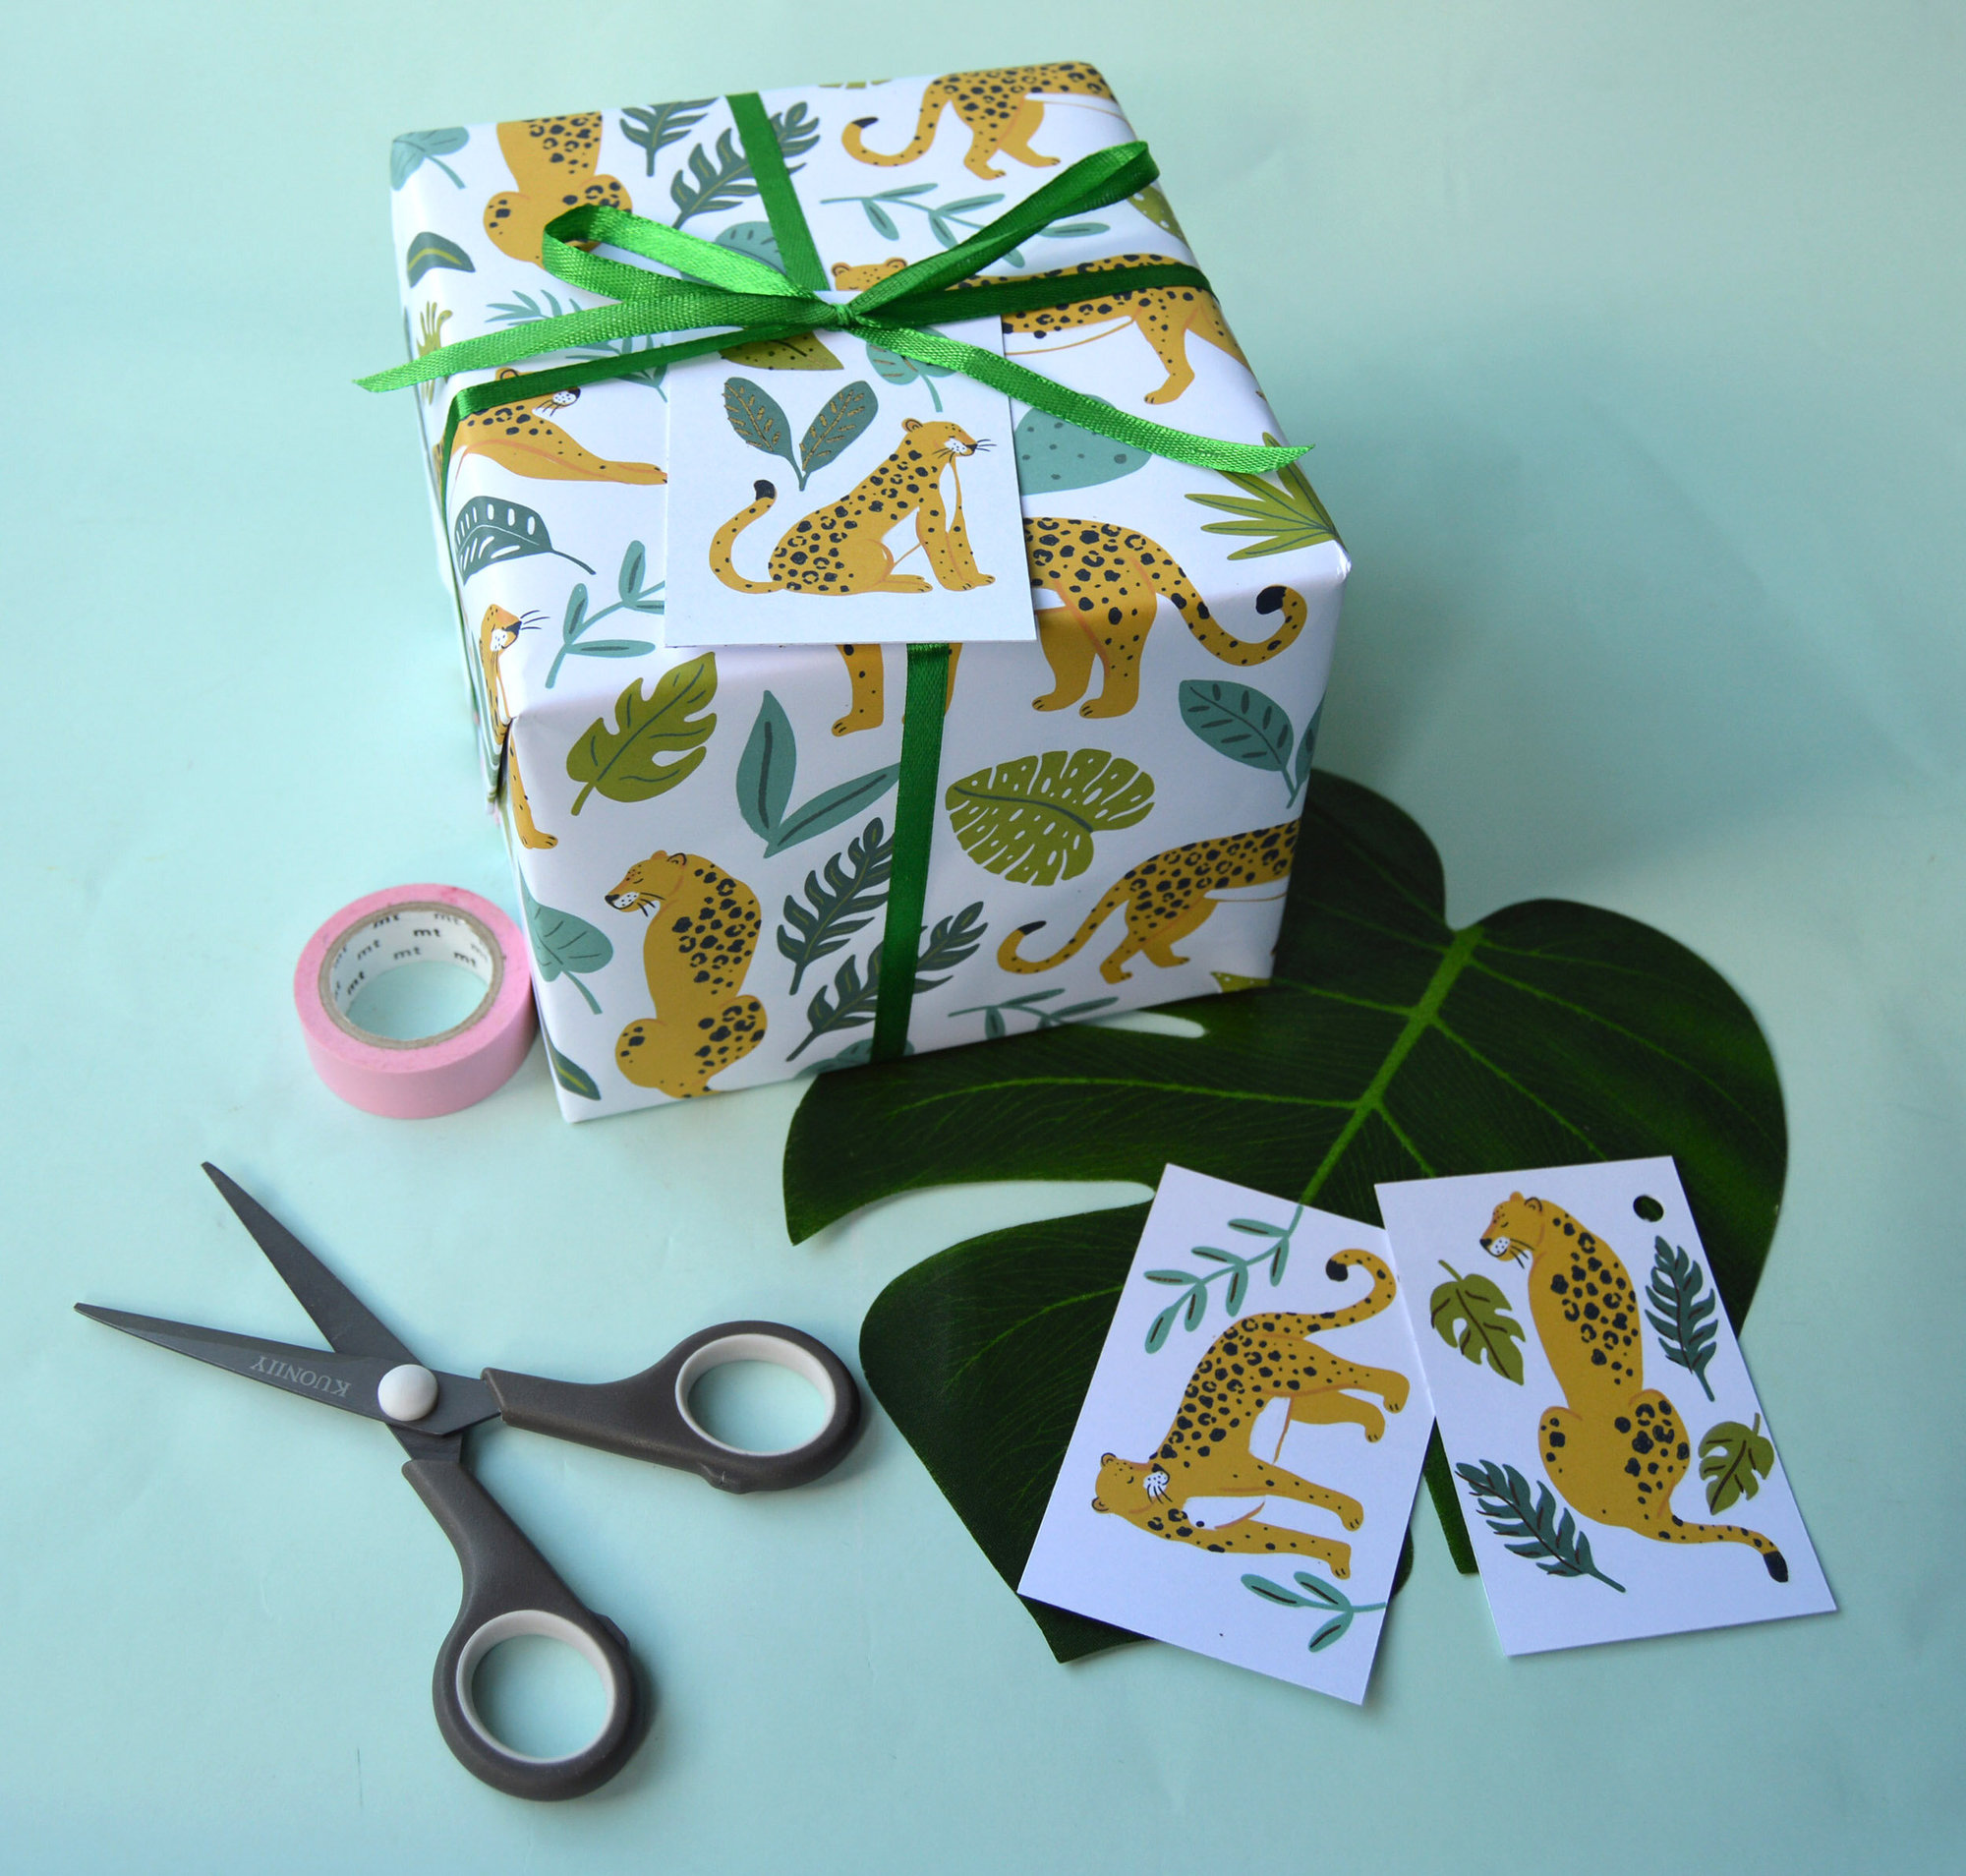 Jungle Leopard Wrapping Paper